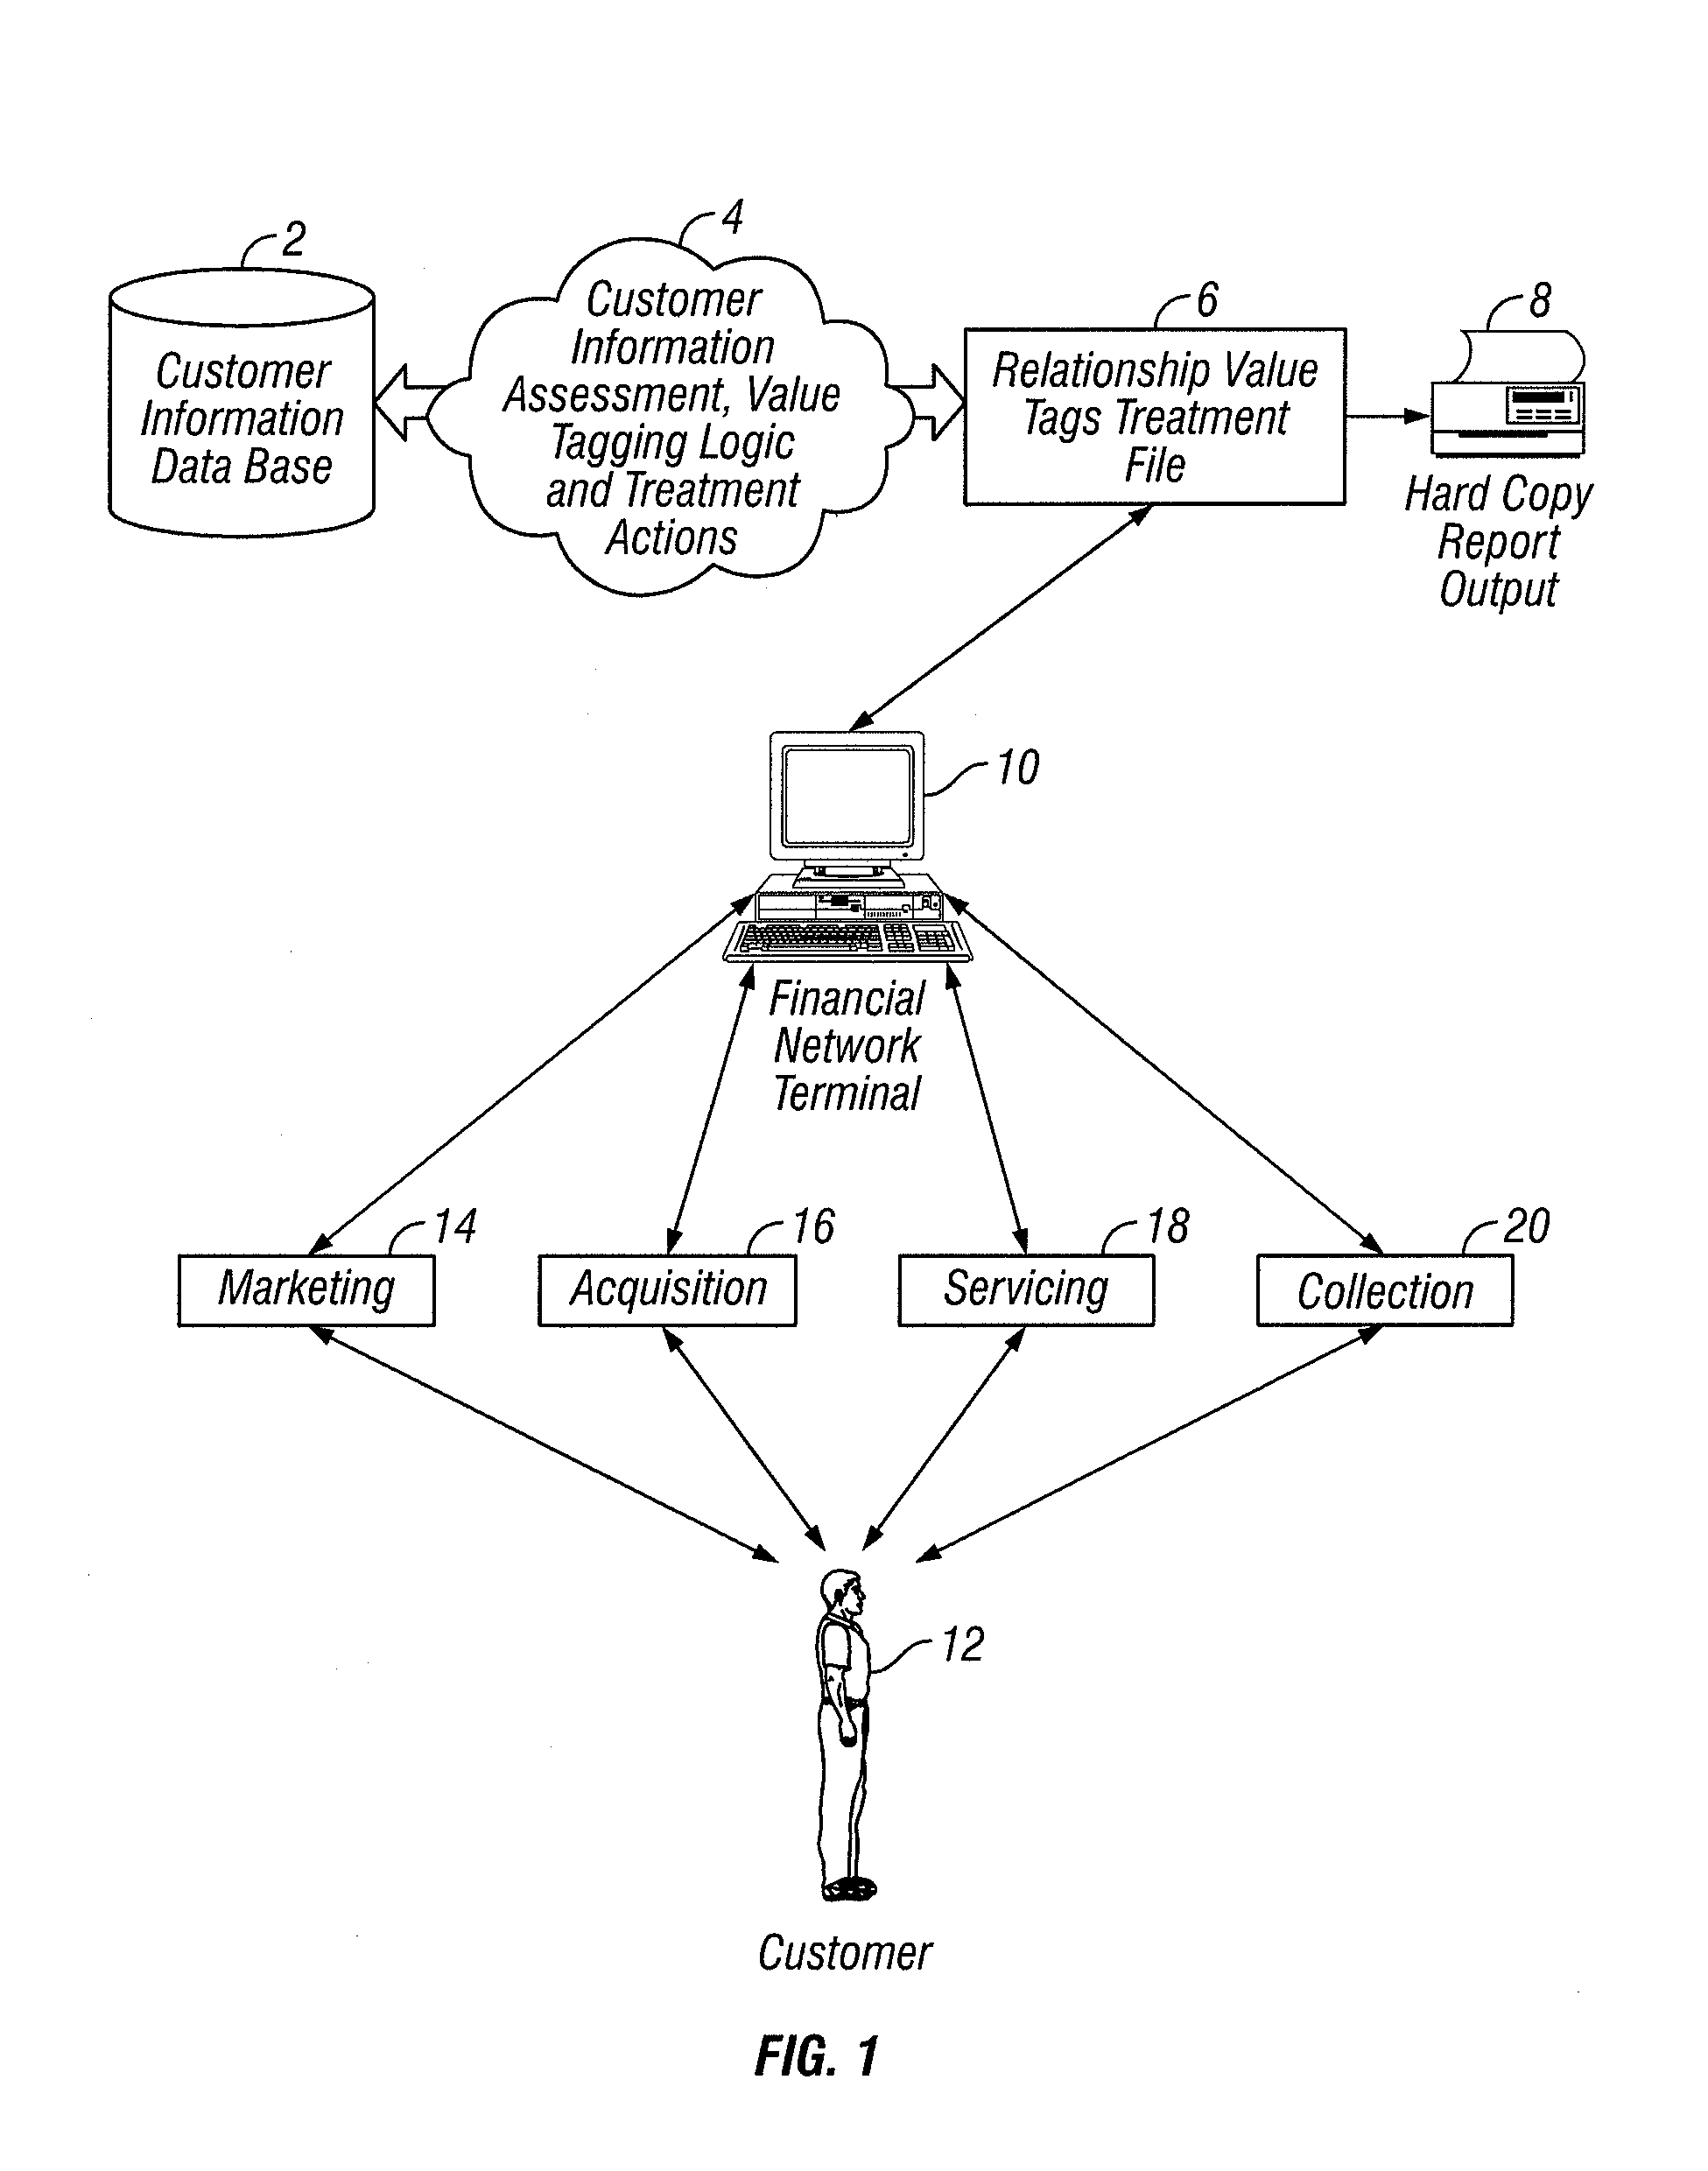 Method and system for evaluating customers of a financial institution using customer relationship value tags